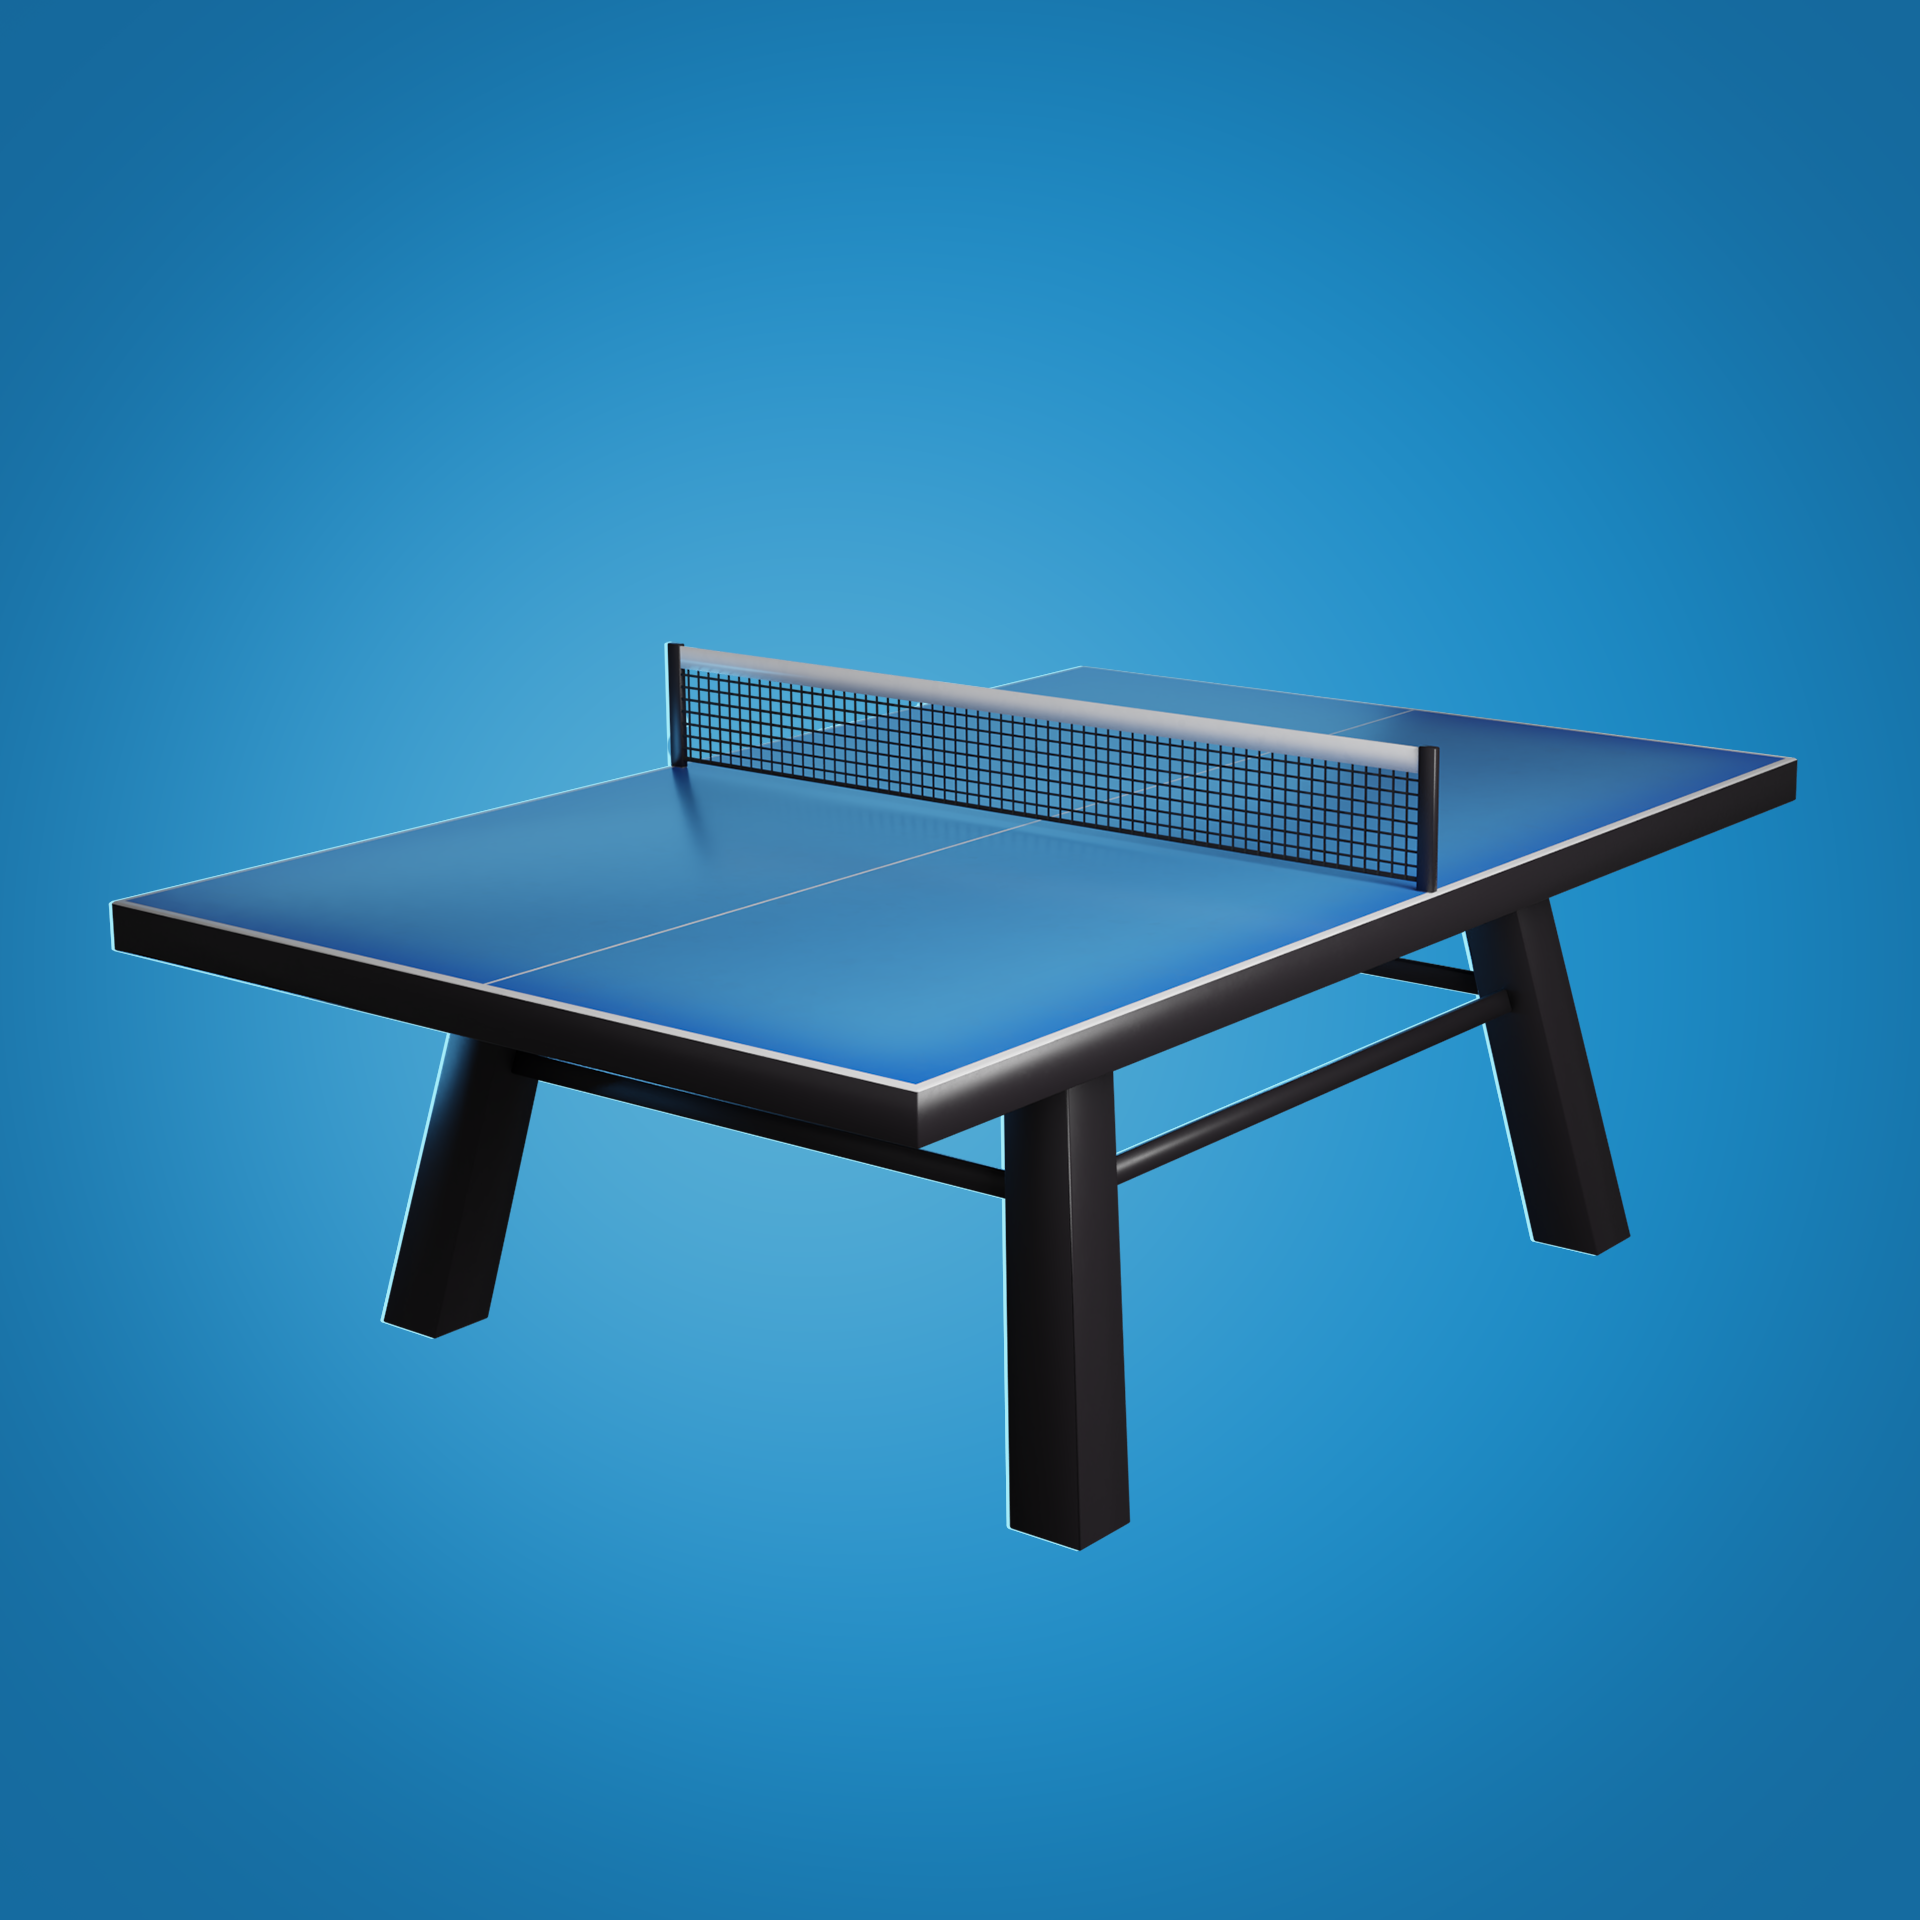 PingPong_net_and_table_01_v002.png